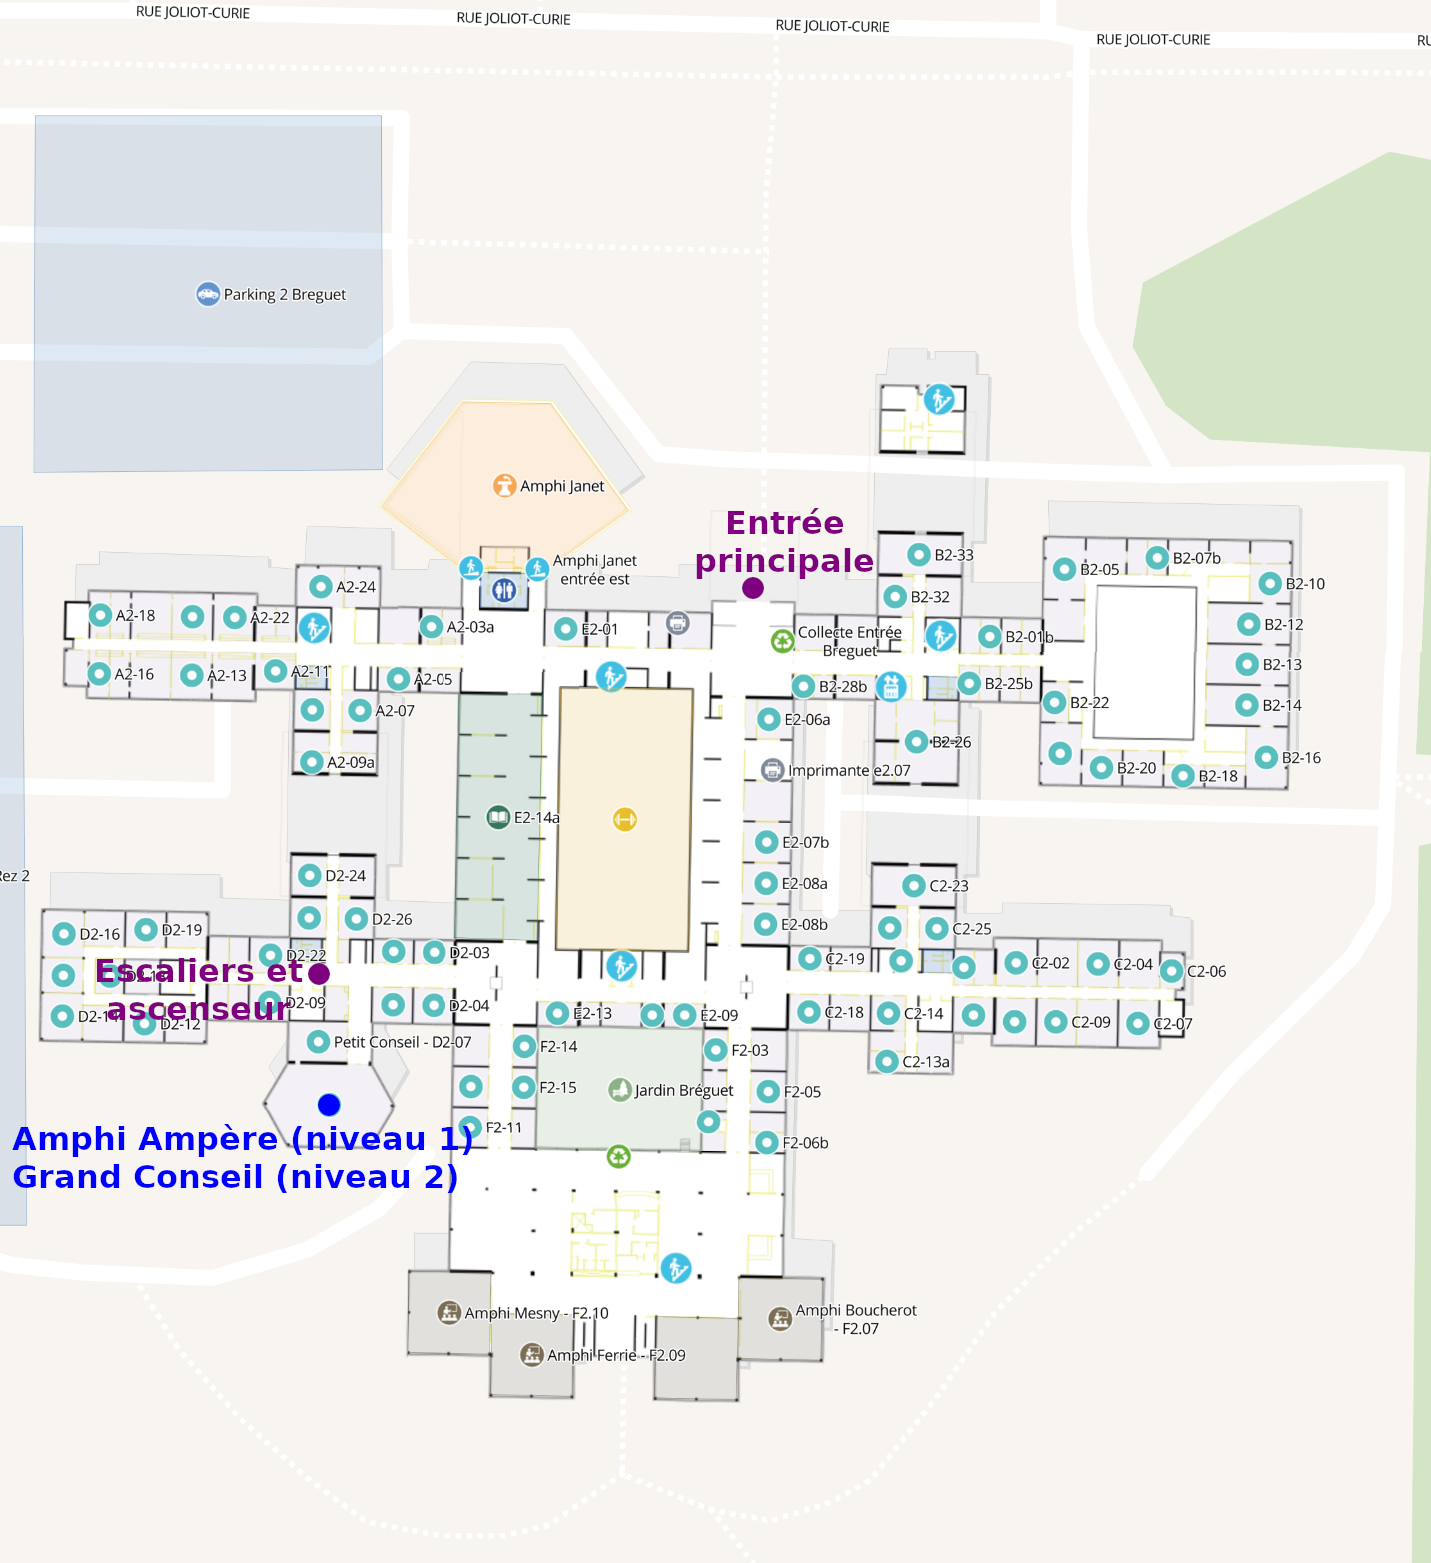 Breguet building map (French)